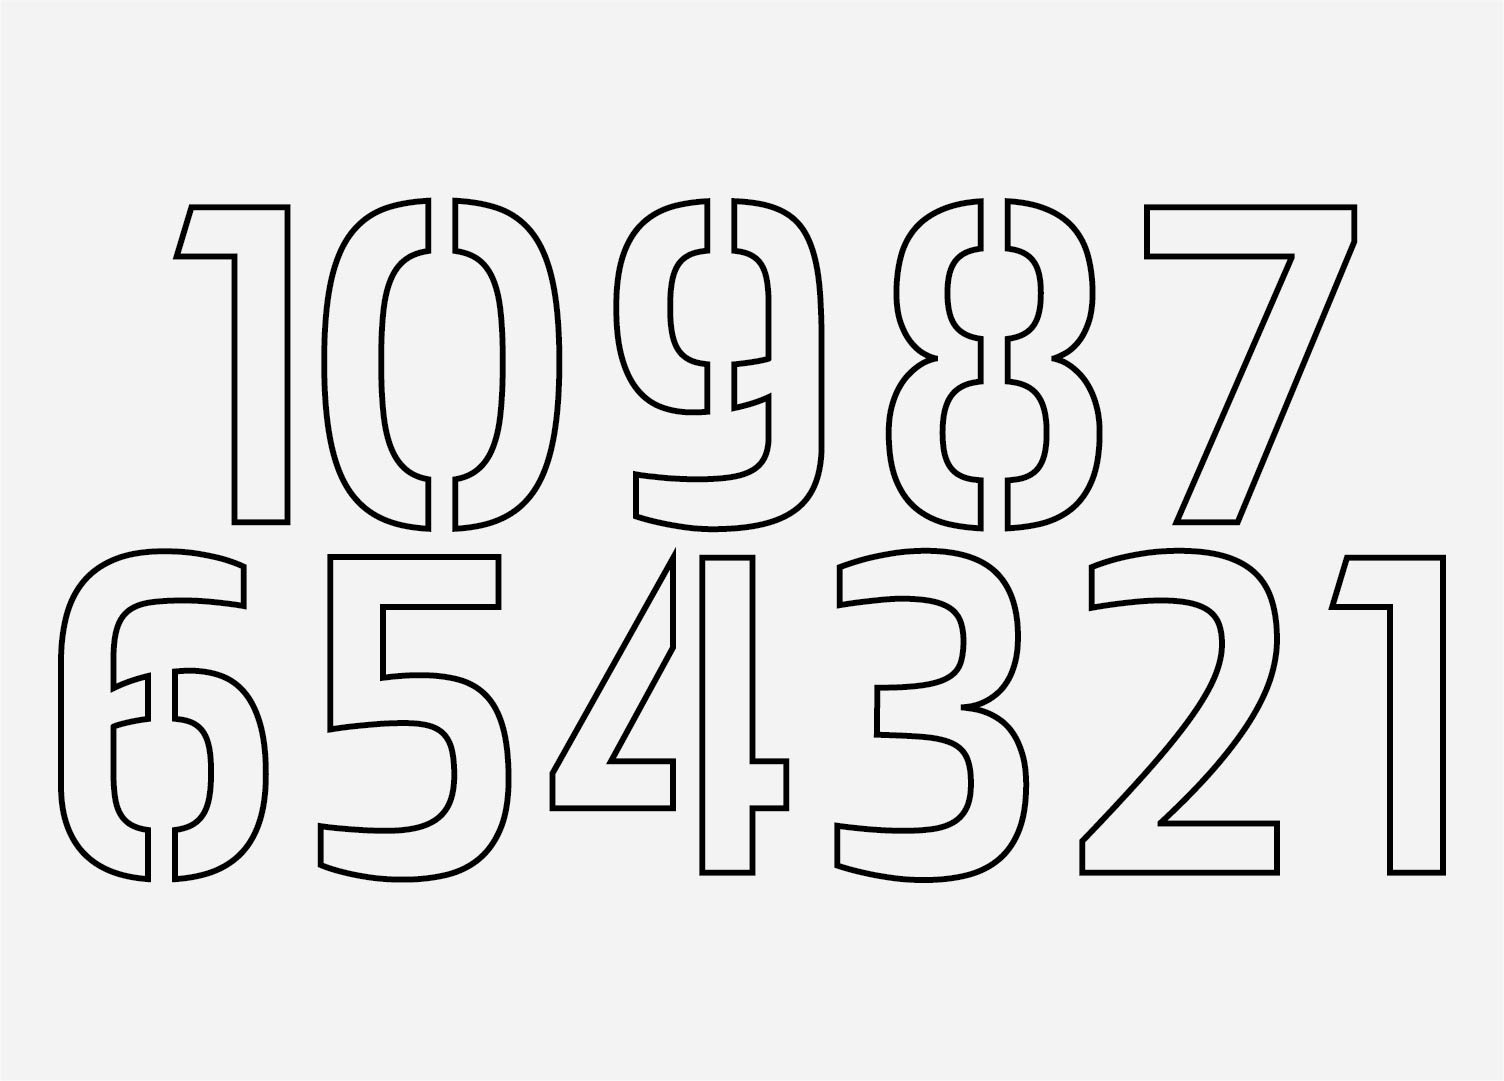 numbers template free